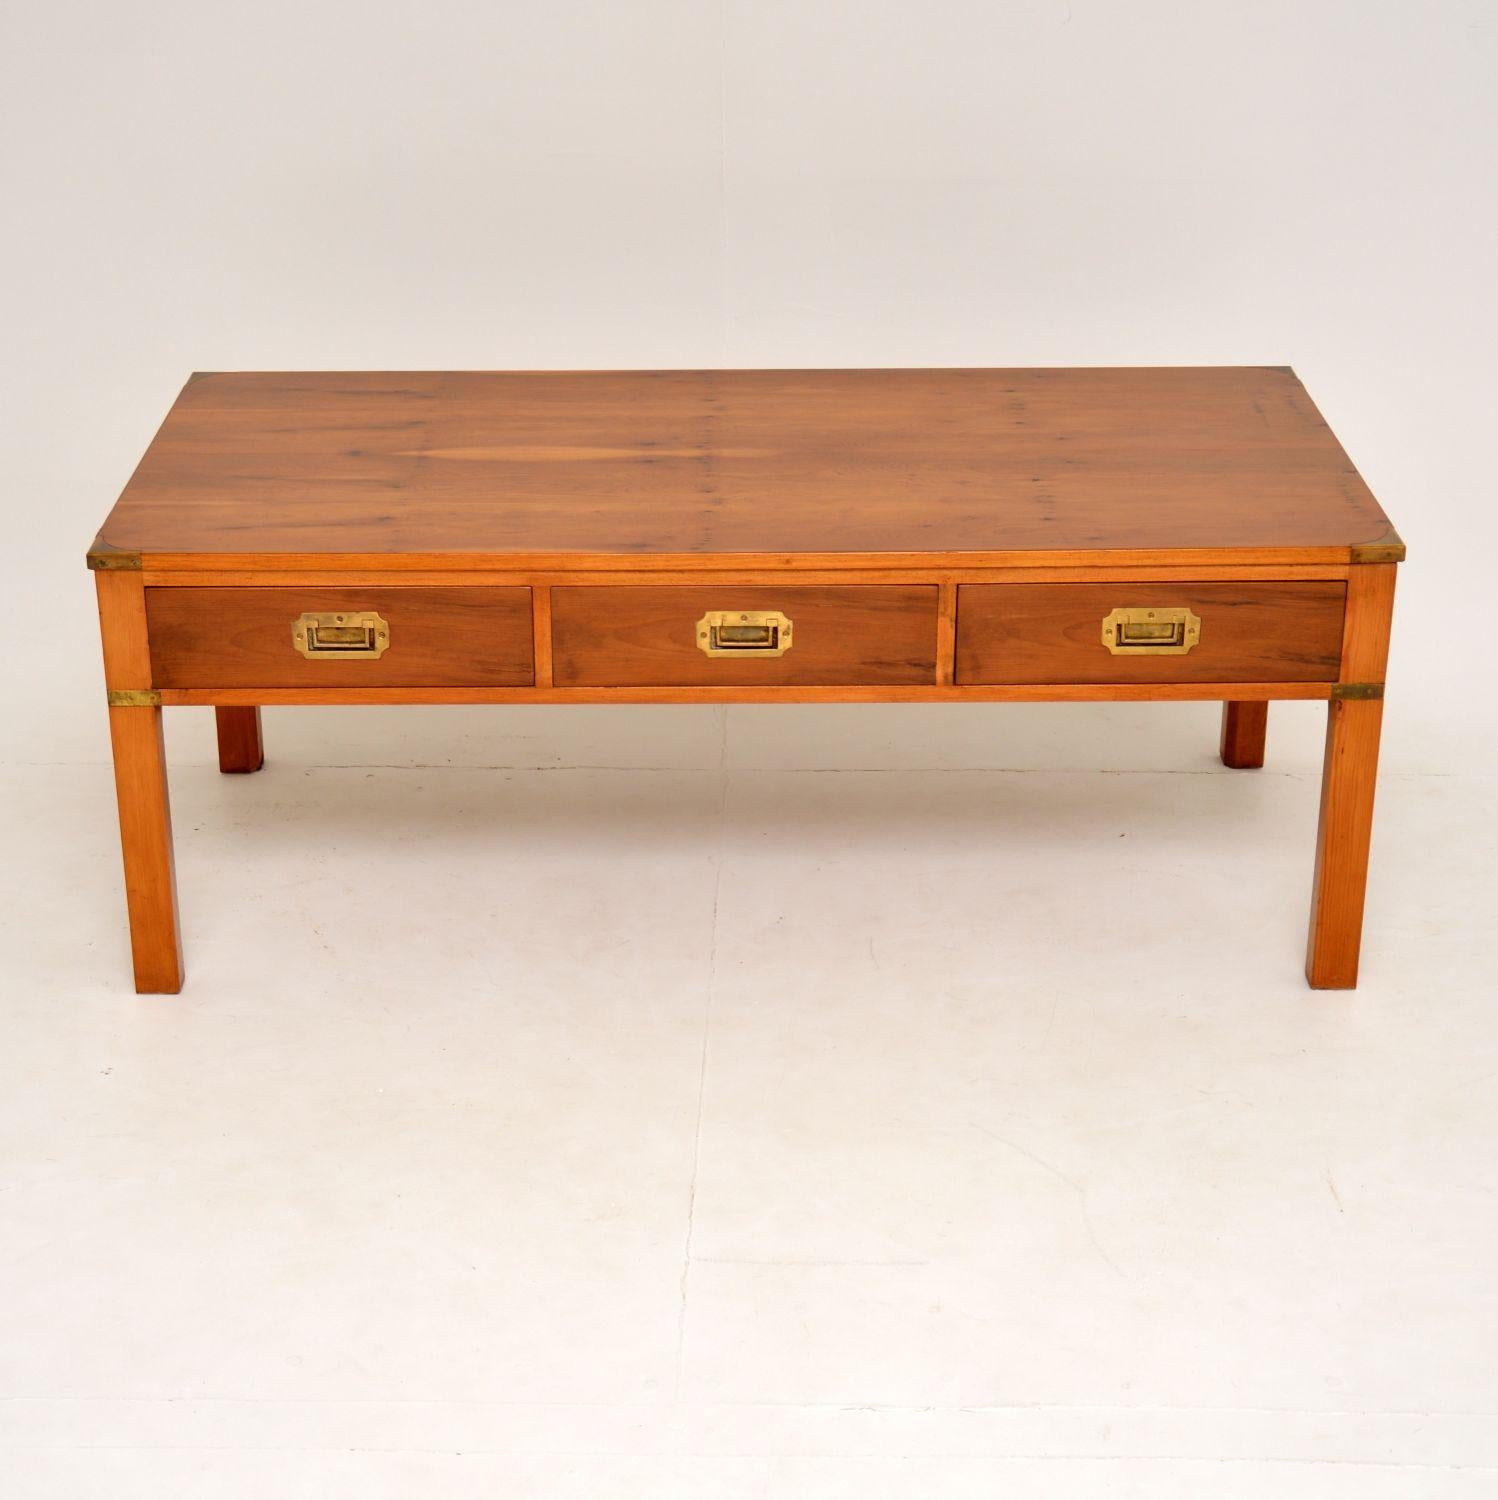 Antique Military Campaign style large coffee table in yew wood with brass corner fittings and sunken brass military drawer handles. It has a lovely mellow color and a nice grain to the wood all-over. There are three drawers on one side and the other